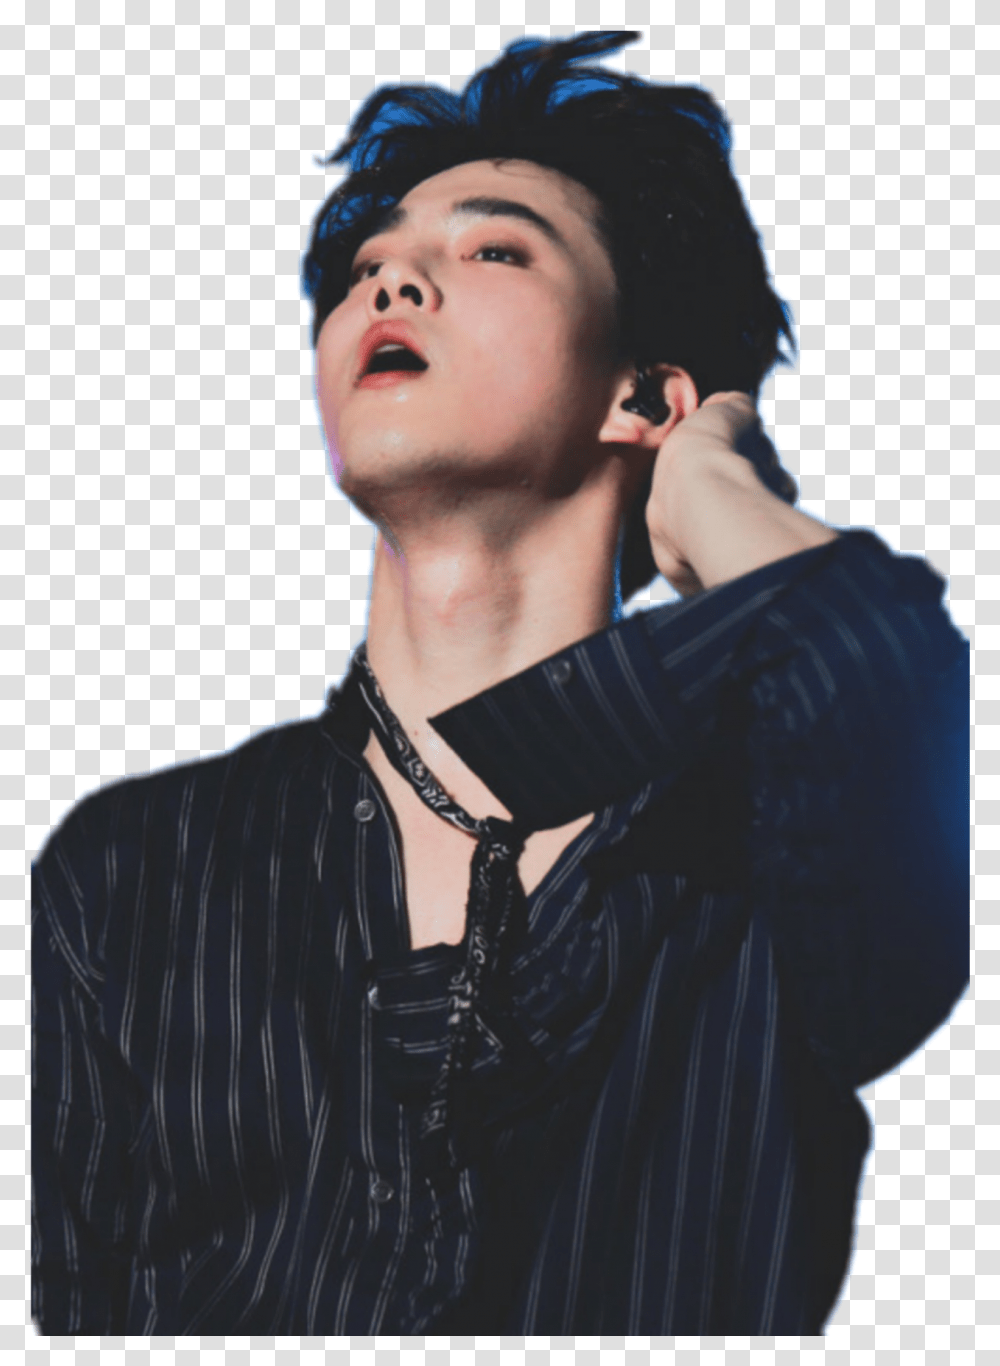 Exo Suho Kpop Suho Exo Sticker Malak Exo Stickers, Person, Face, Skin, Portrait Transparent Png